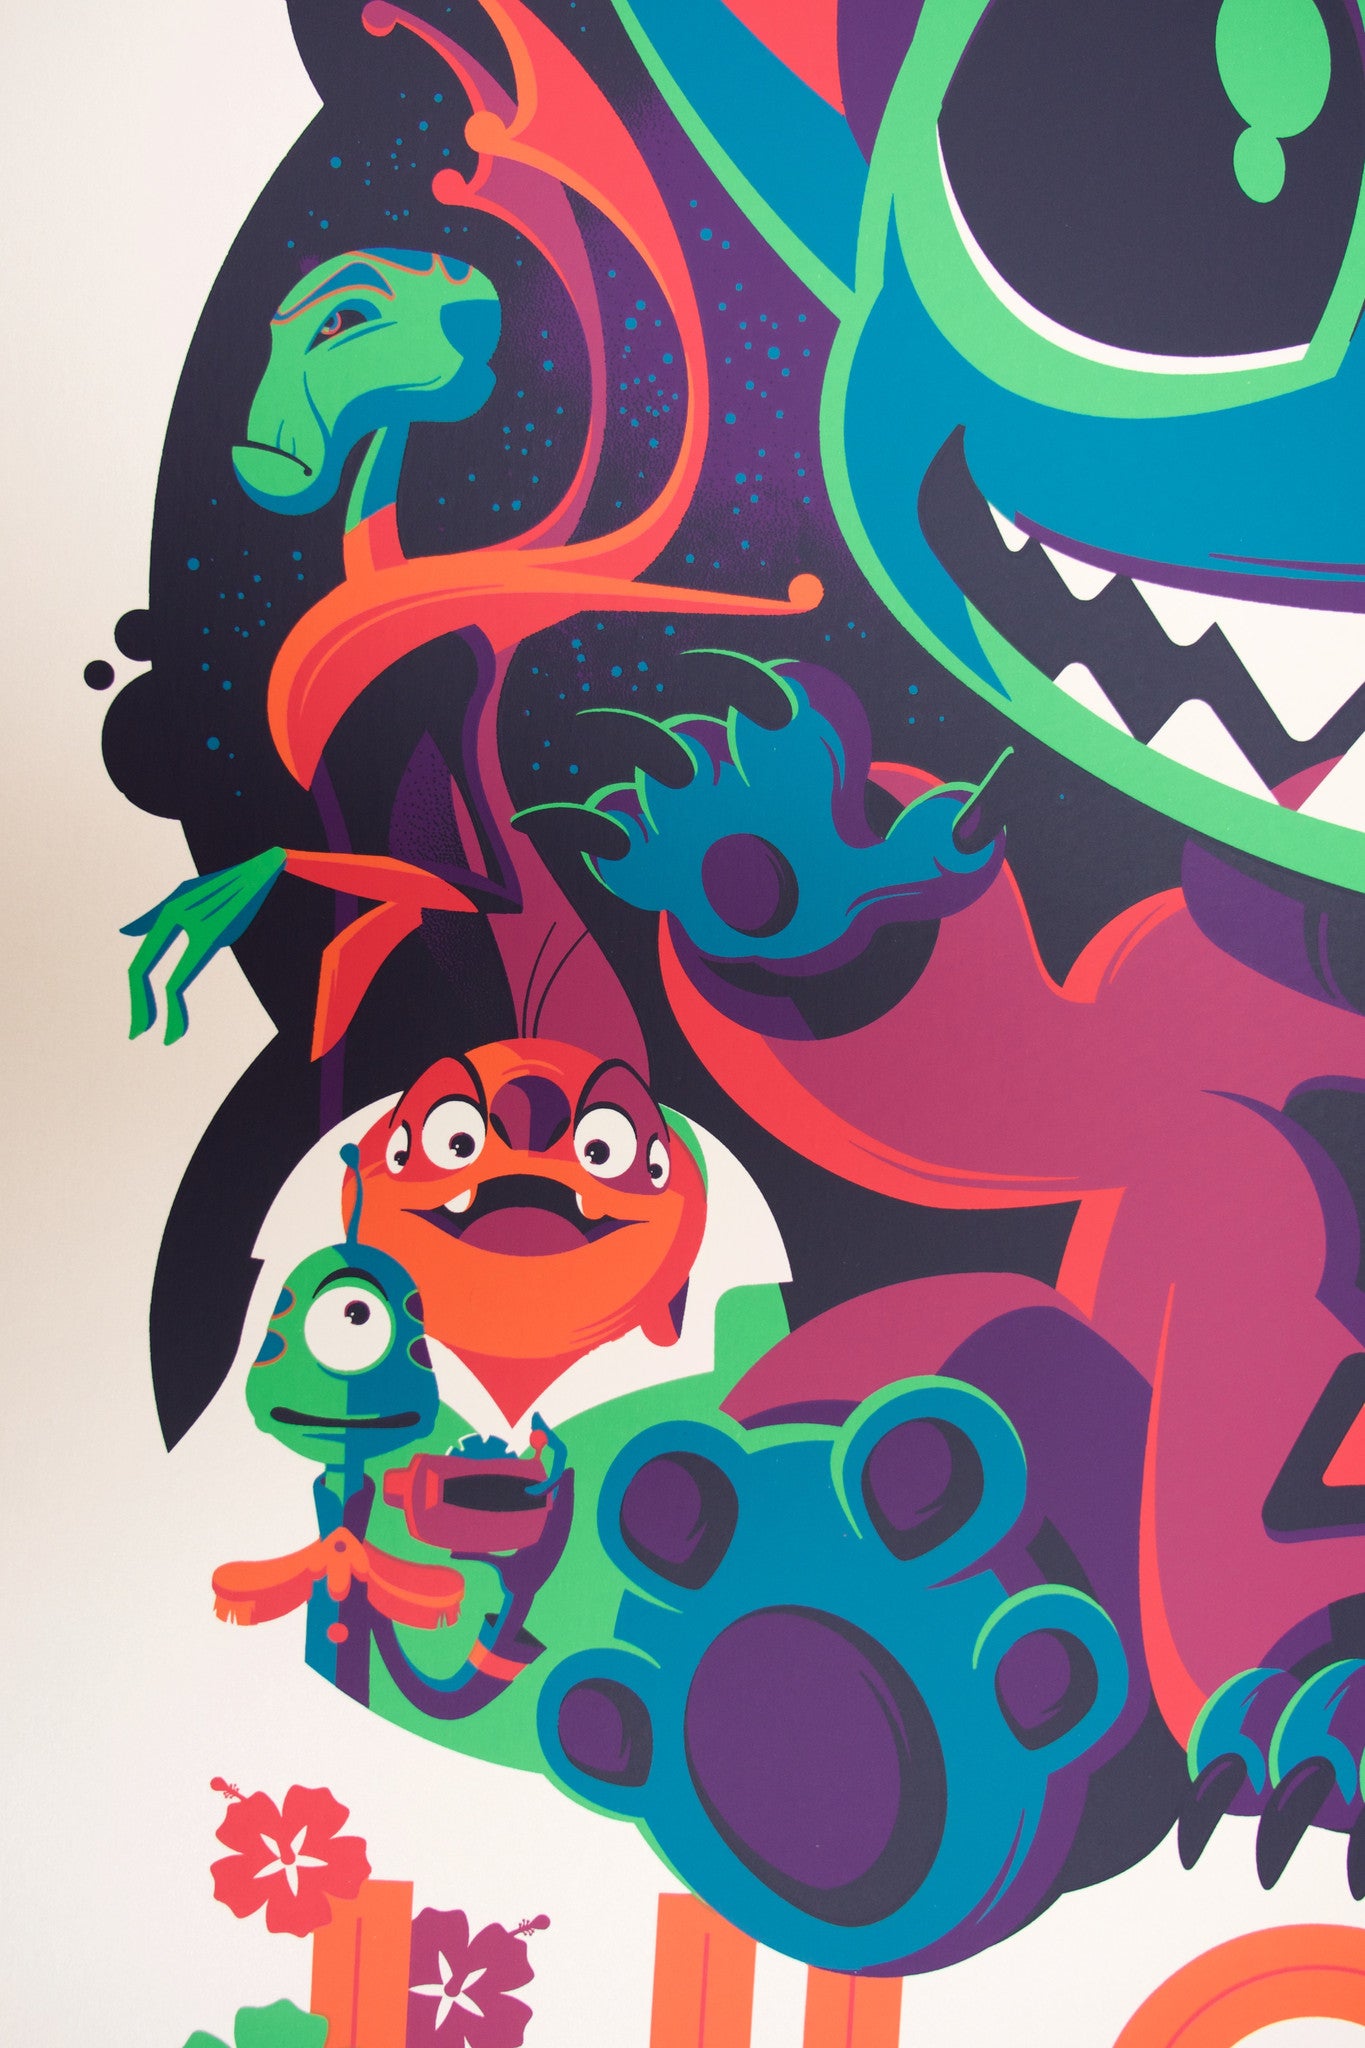 Cyclops Print Works Print #04V: Lilo & Stitch Sunset Variant Edition by Tom Whalen